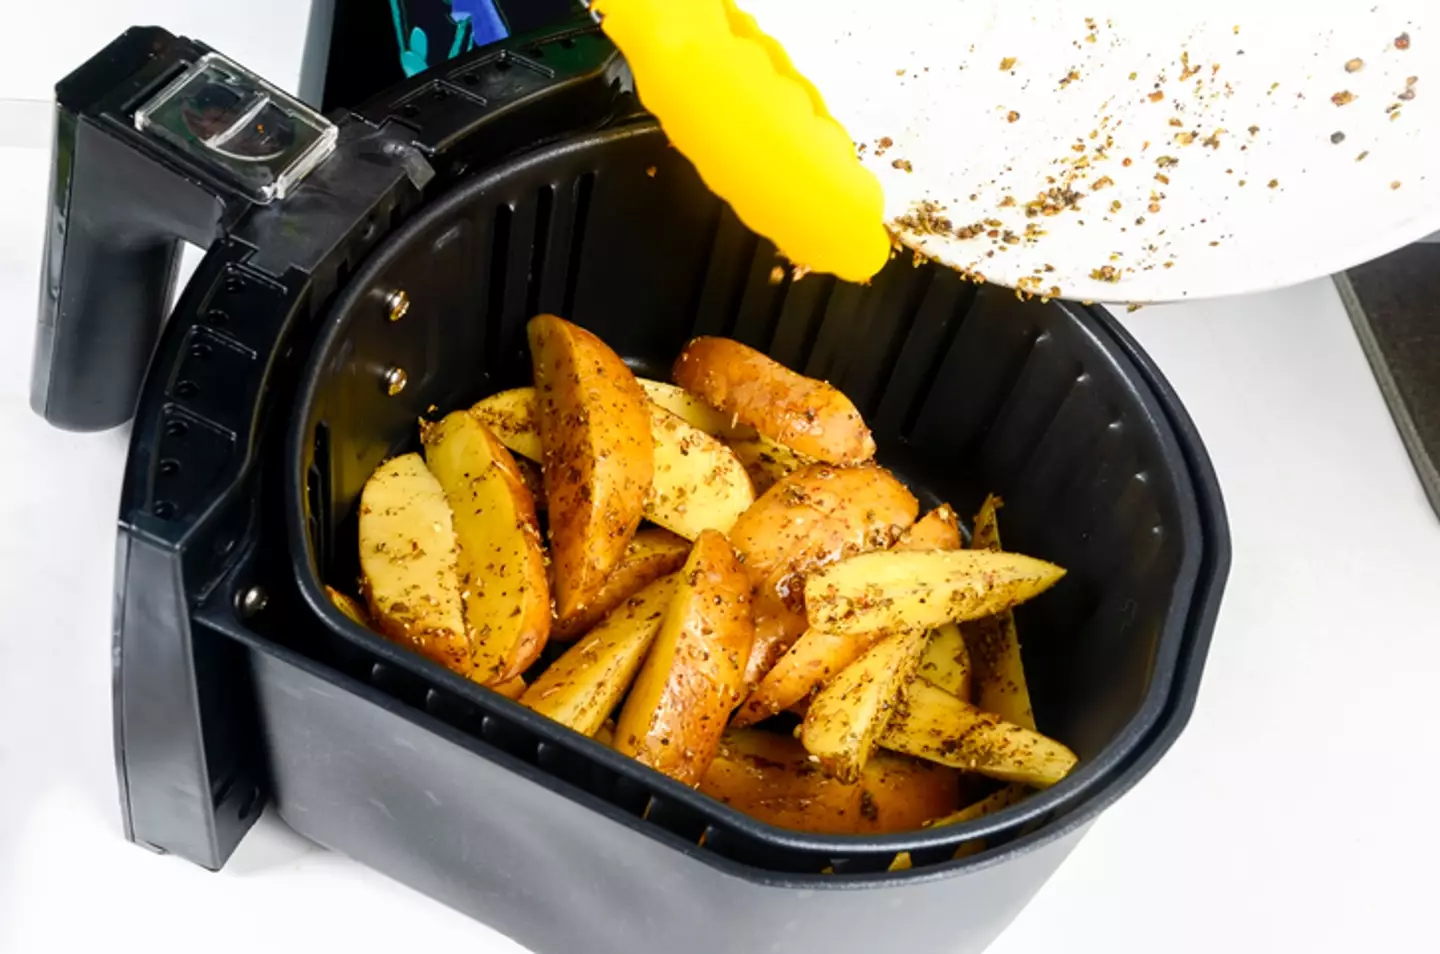 We all love a proper good portion of air fryer chips.